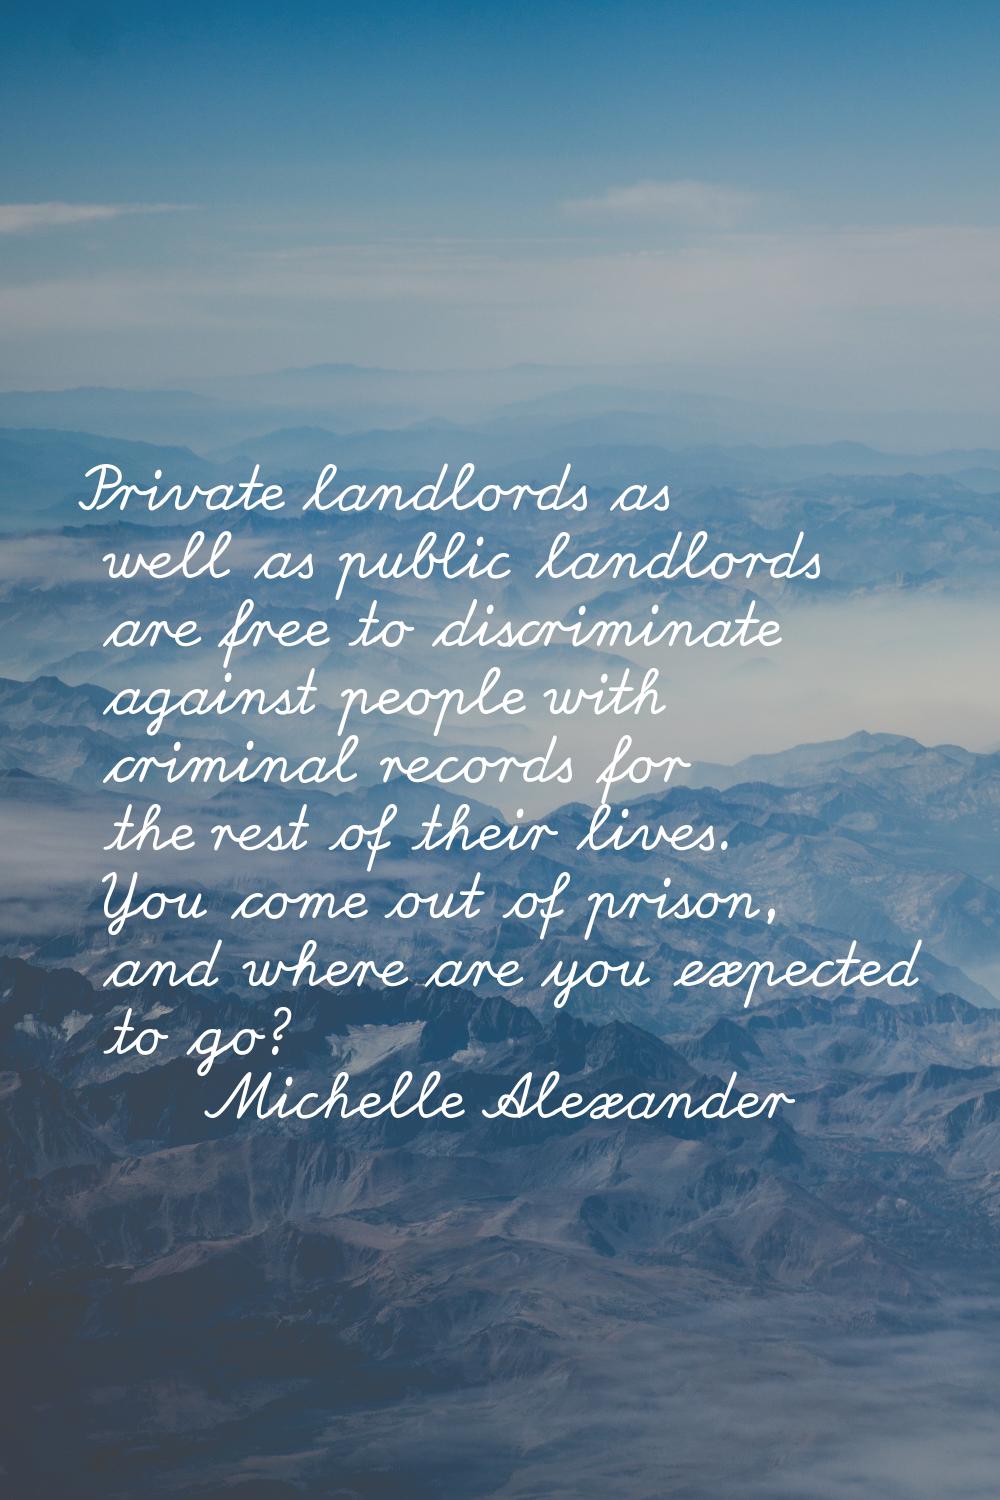 Private landlords as well as public landlords are free to discriminate against people with criminal